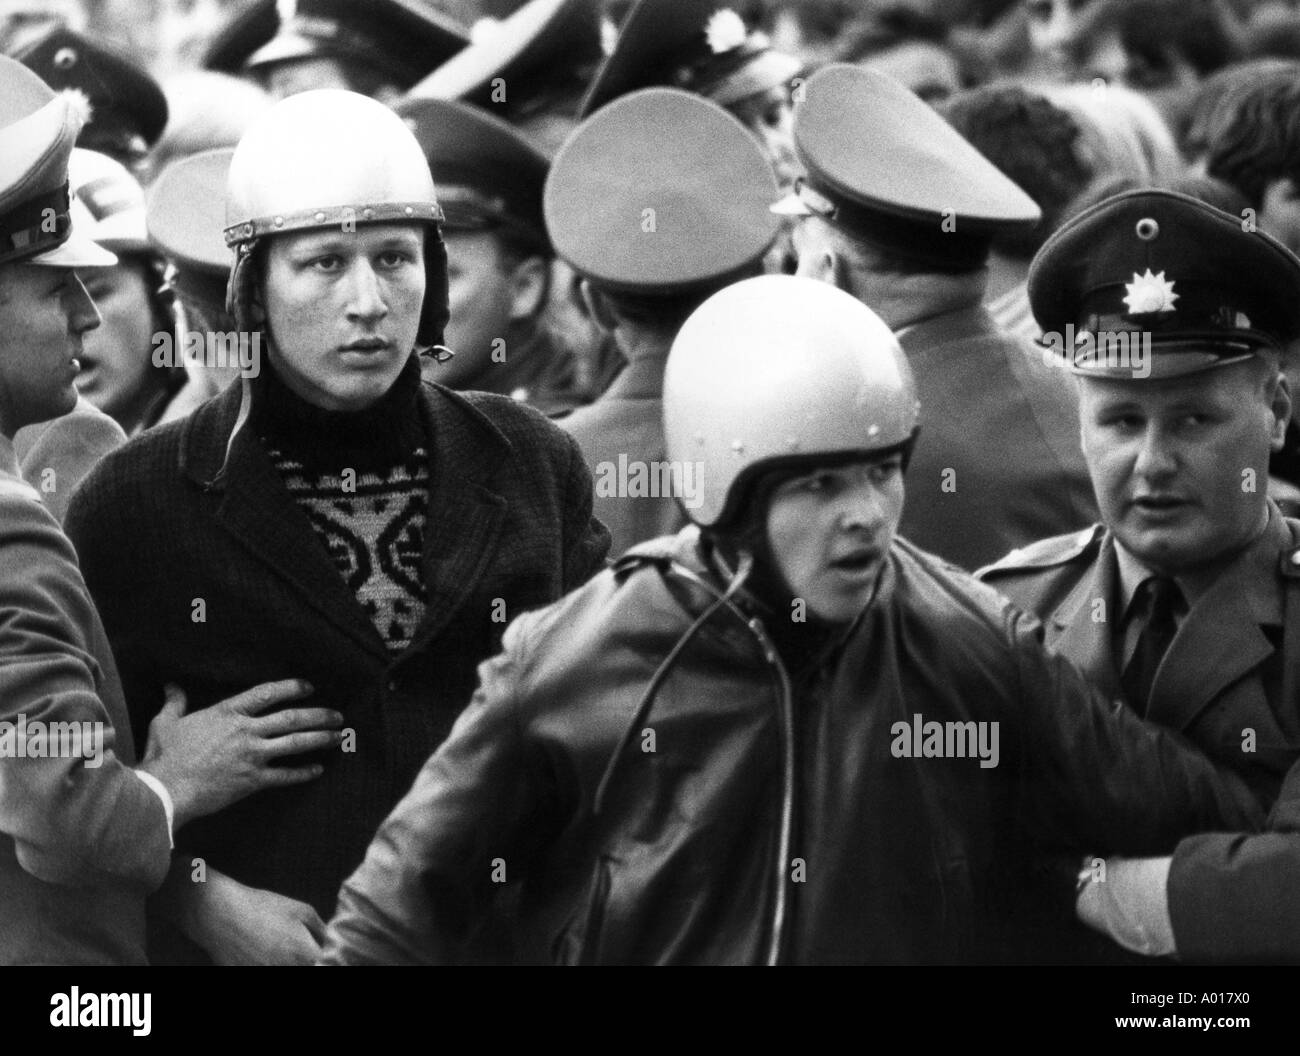 The Beatles, concert in Essen, Ruhr area, Gruga Hall, 1966, 1960s, the sixties, England, London, Great Britain, British pop band, music, musician, group, pop music, singers, youths waiting for entrance, young people, boys, leather jacket, motorbike helmet Stock Photo